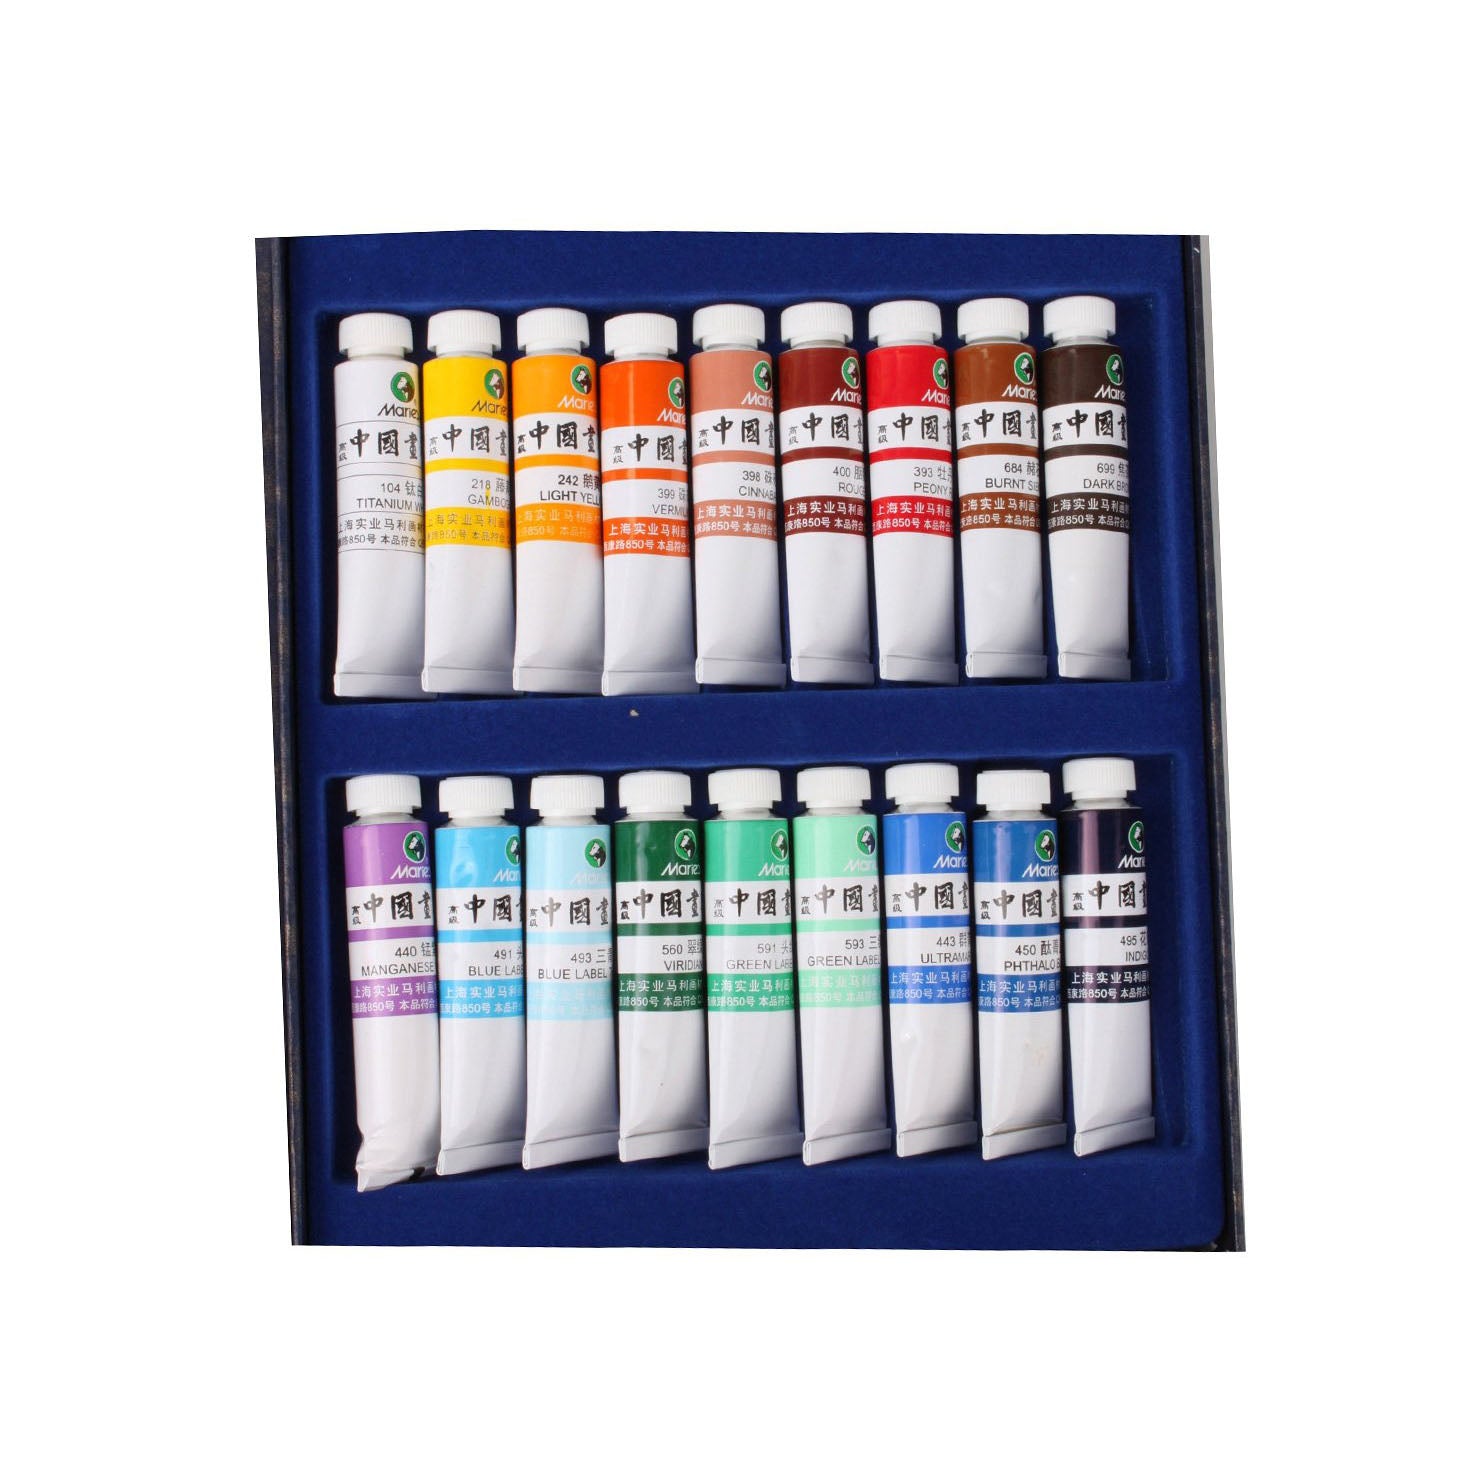 Premium Sumi-e Colors for Calligraphy Writing, Sumi-e and Fineline Painting